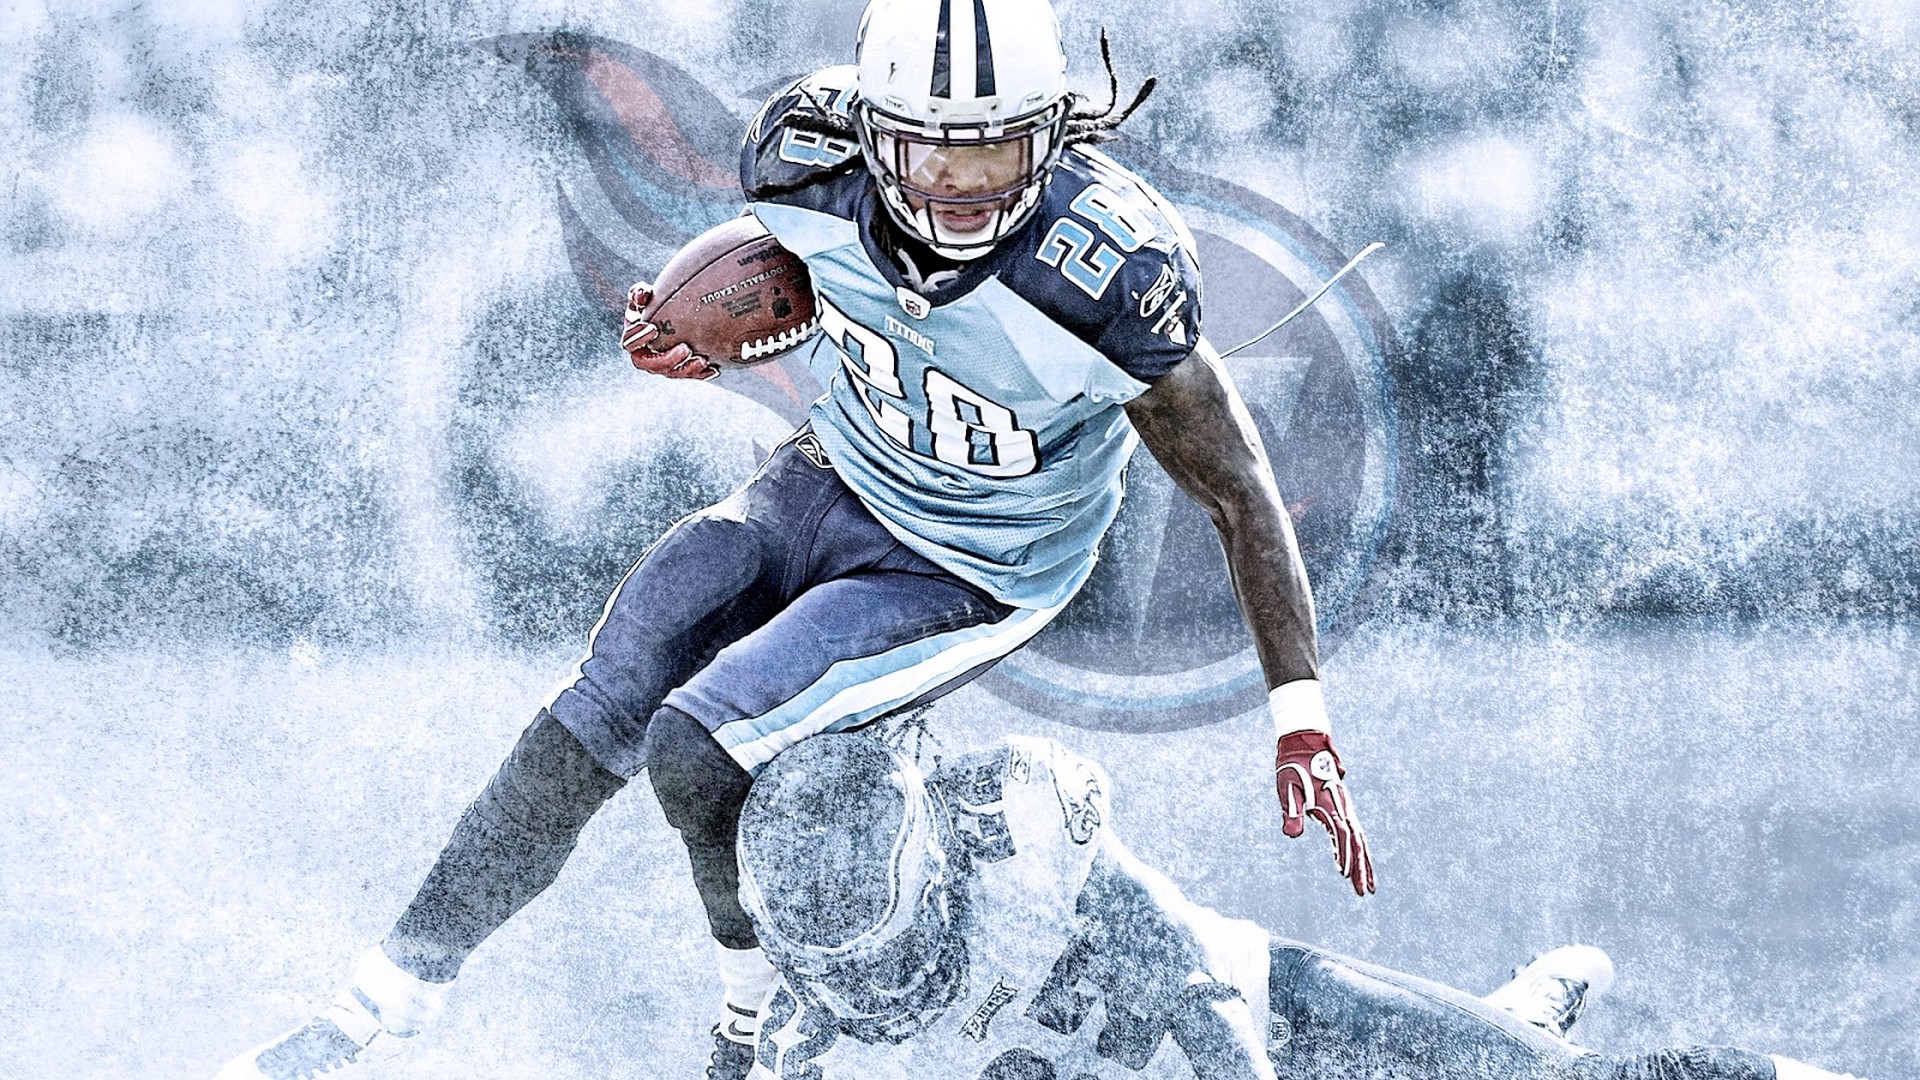 Tennessee Titans Laptop Wallpaper with high-resolution 1920x1080 pixel. Download and set as wallpaper for Desktop Computer, Apple iPhone X, XS Max, XR, 8, 7, 6, SE, iPad, Android